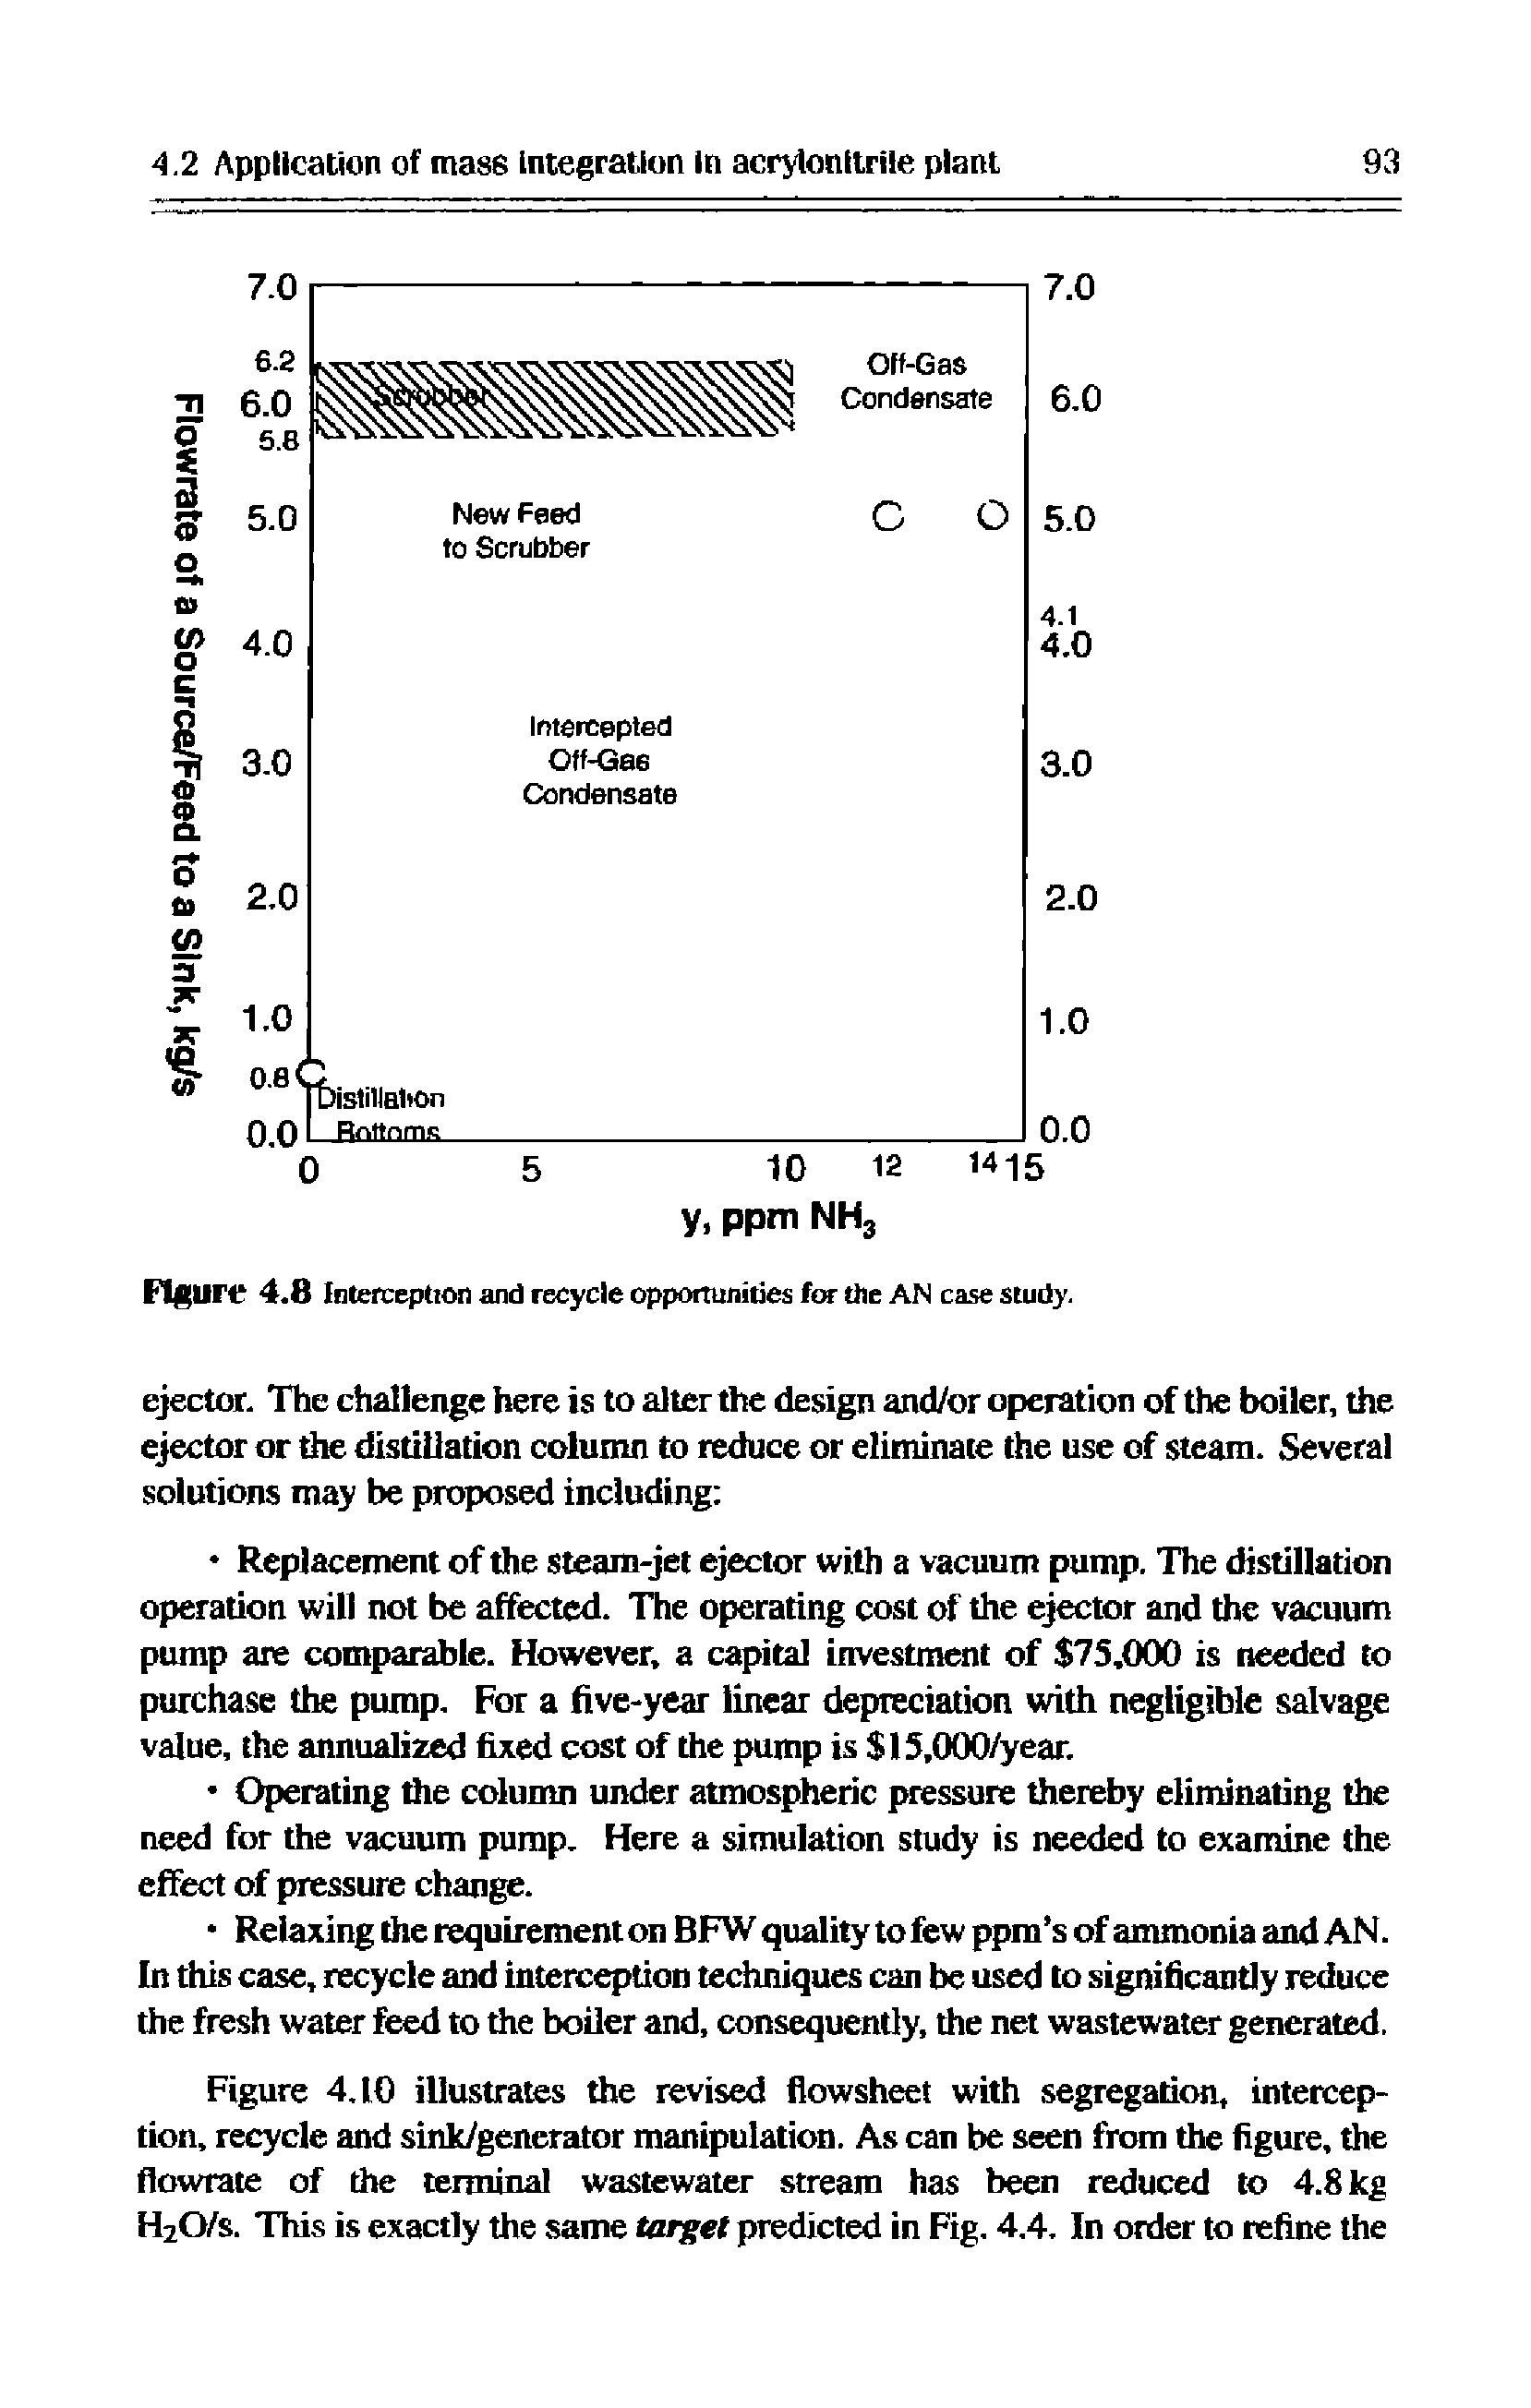 Figure 4,10 illustrates the revised flowsheet with segregation, interception, recycle and sink/generator manipulation. As can be seen from the figure, the flowrate of the terminal wastewater stream has been reduced to 4.8 kg H2O/S. This is exactly the same target predicted in Fig. 4,4. In order to refine the...